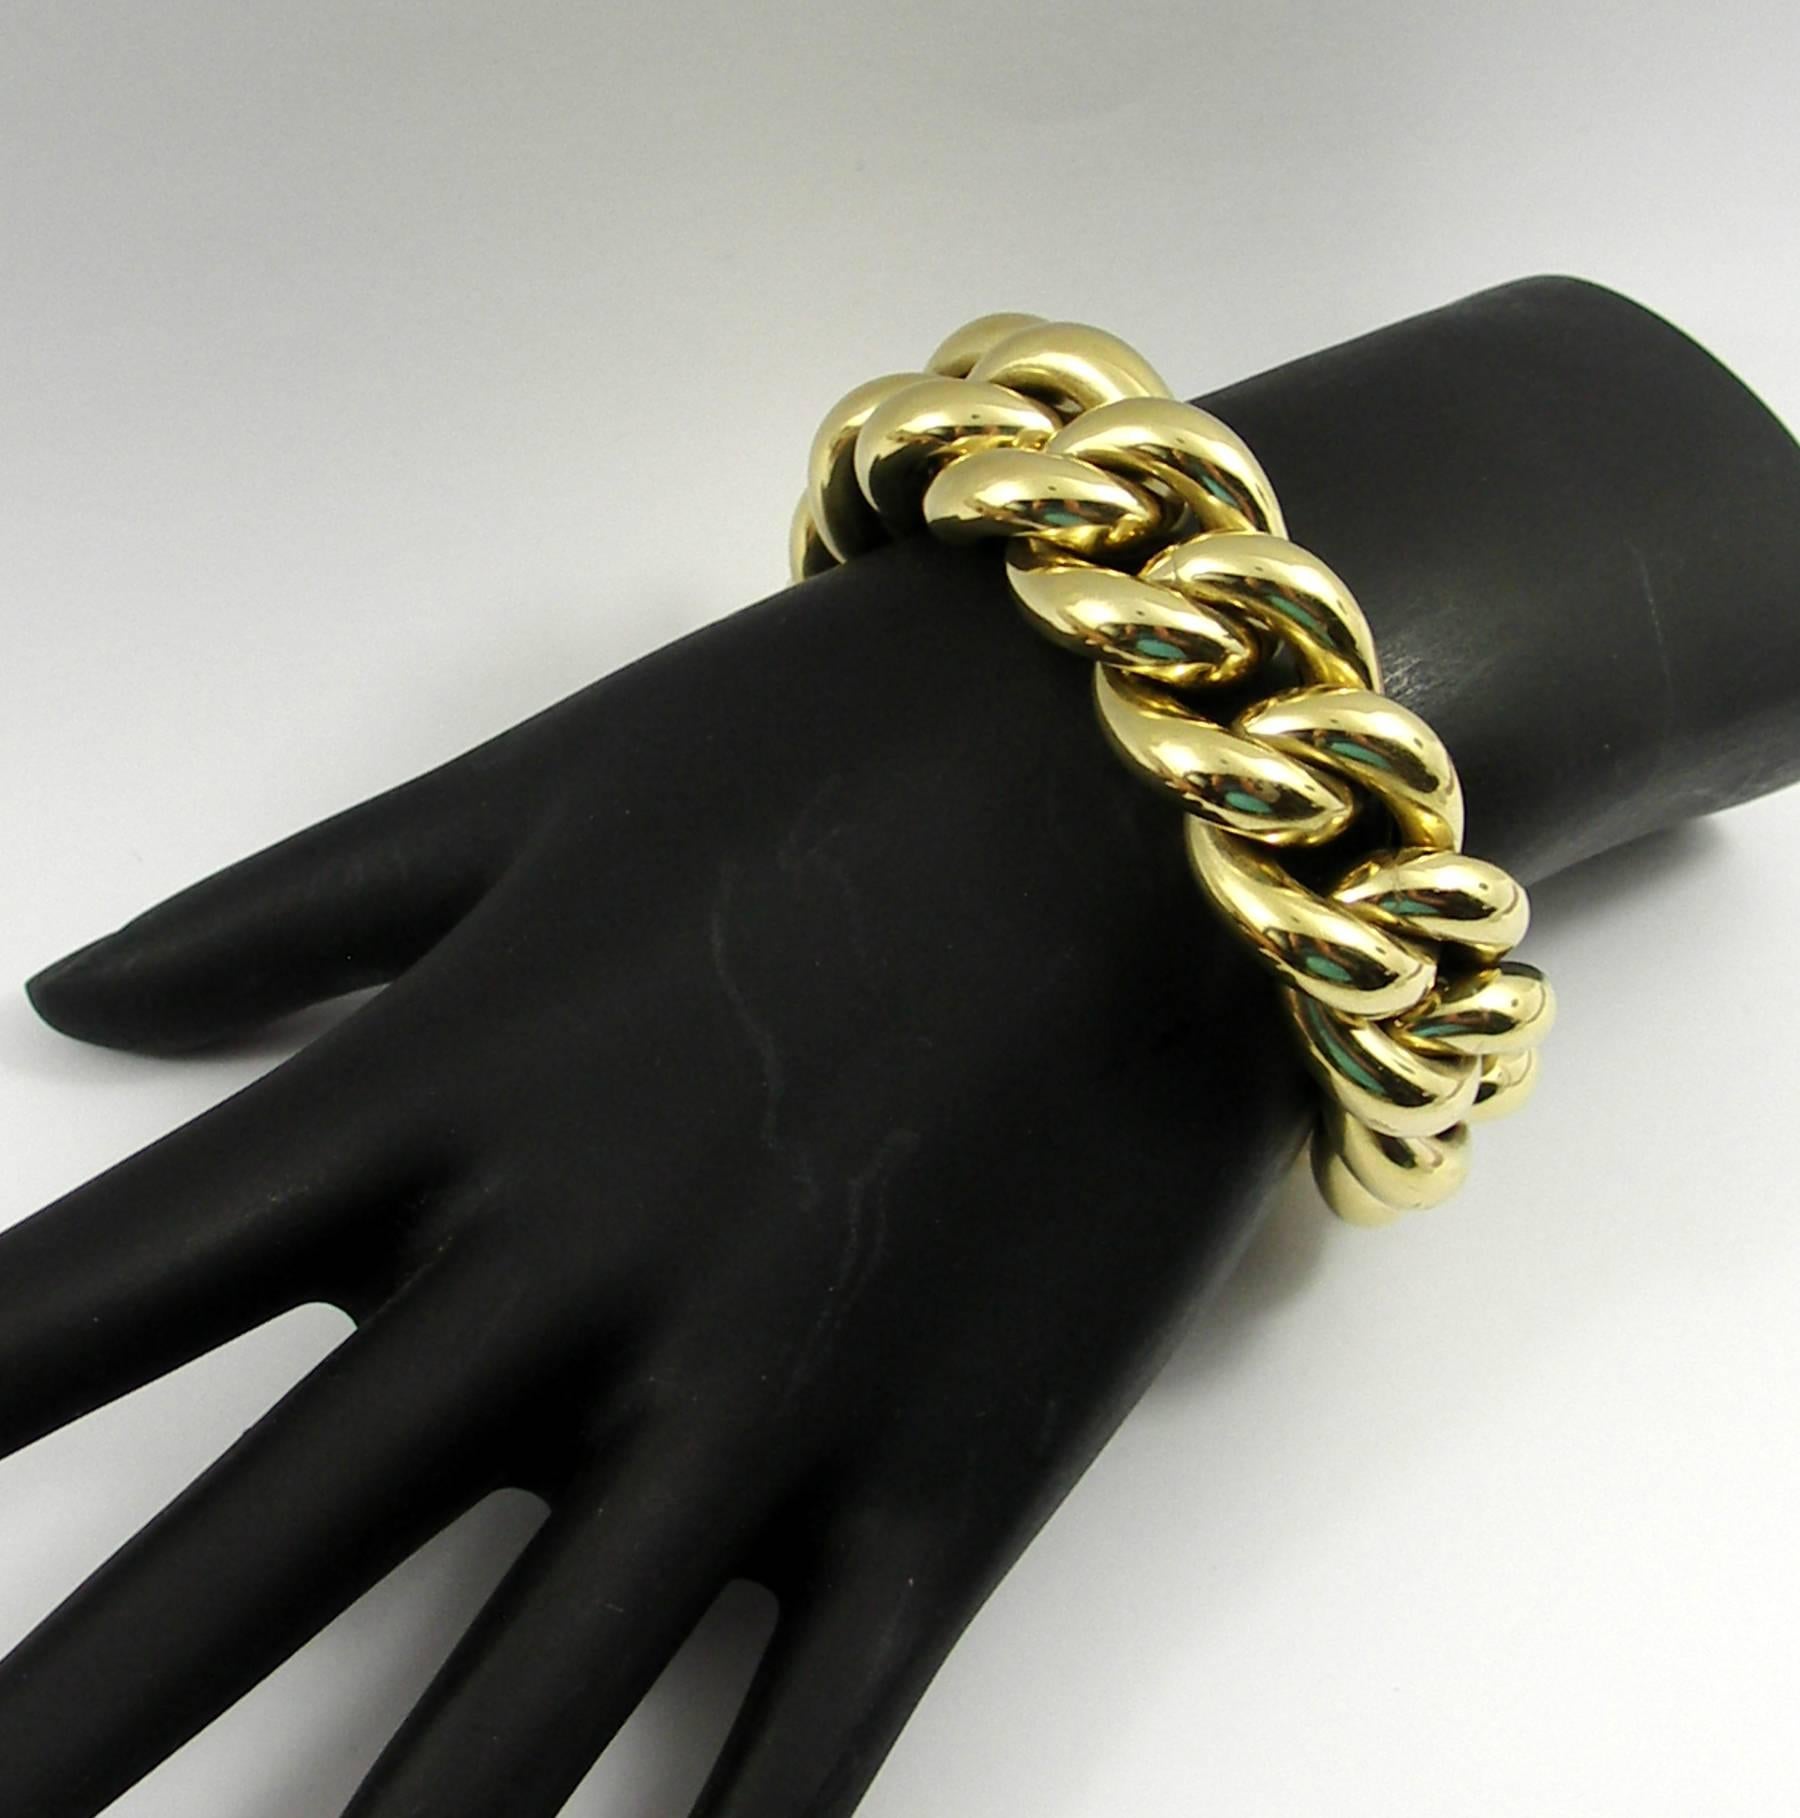 A 14K yellow gold, rounded curb link bracelet comprised of 15 links, each measuring 3/4 of an inch wide. Bracelet is hallmarked Vicenza Italy, and inside circumference is 6 1/2 inches.